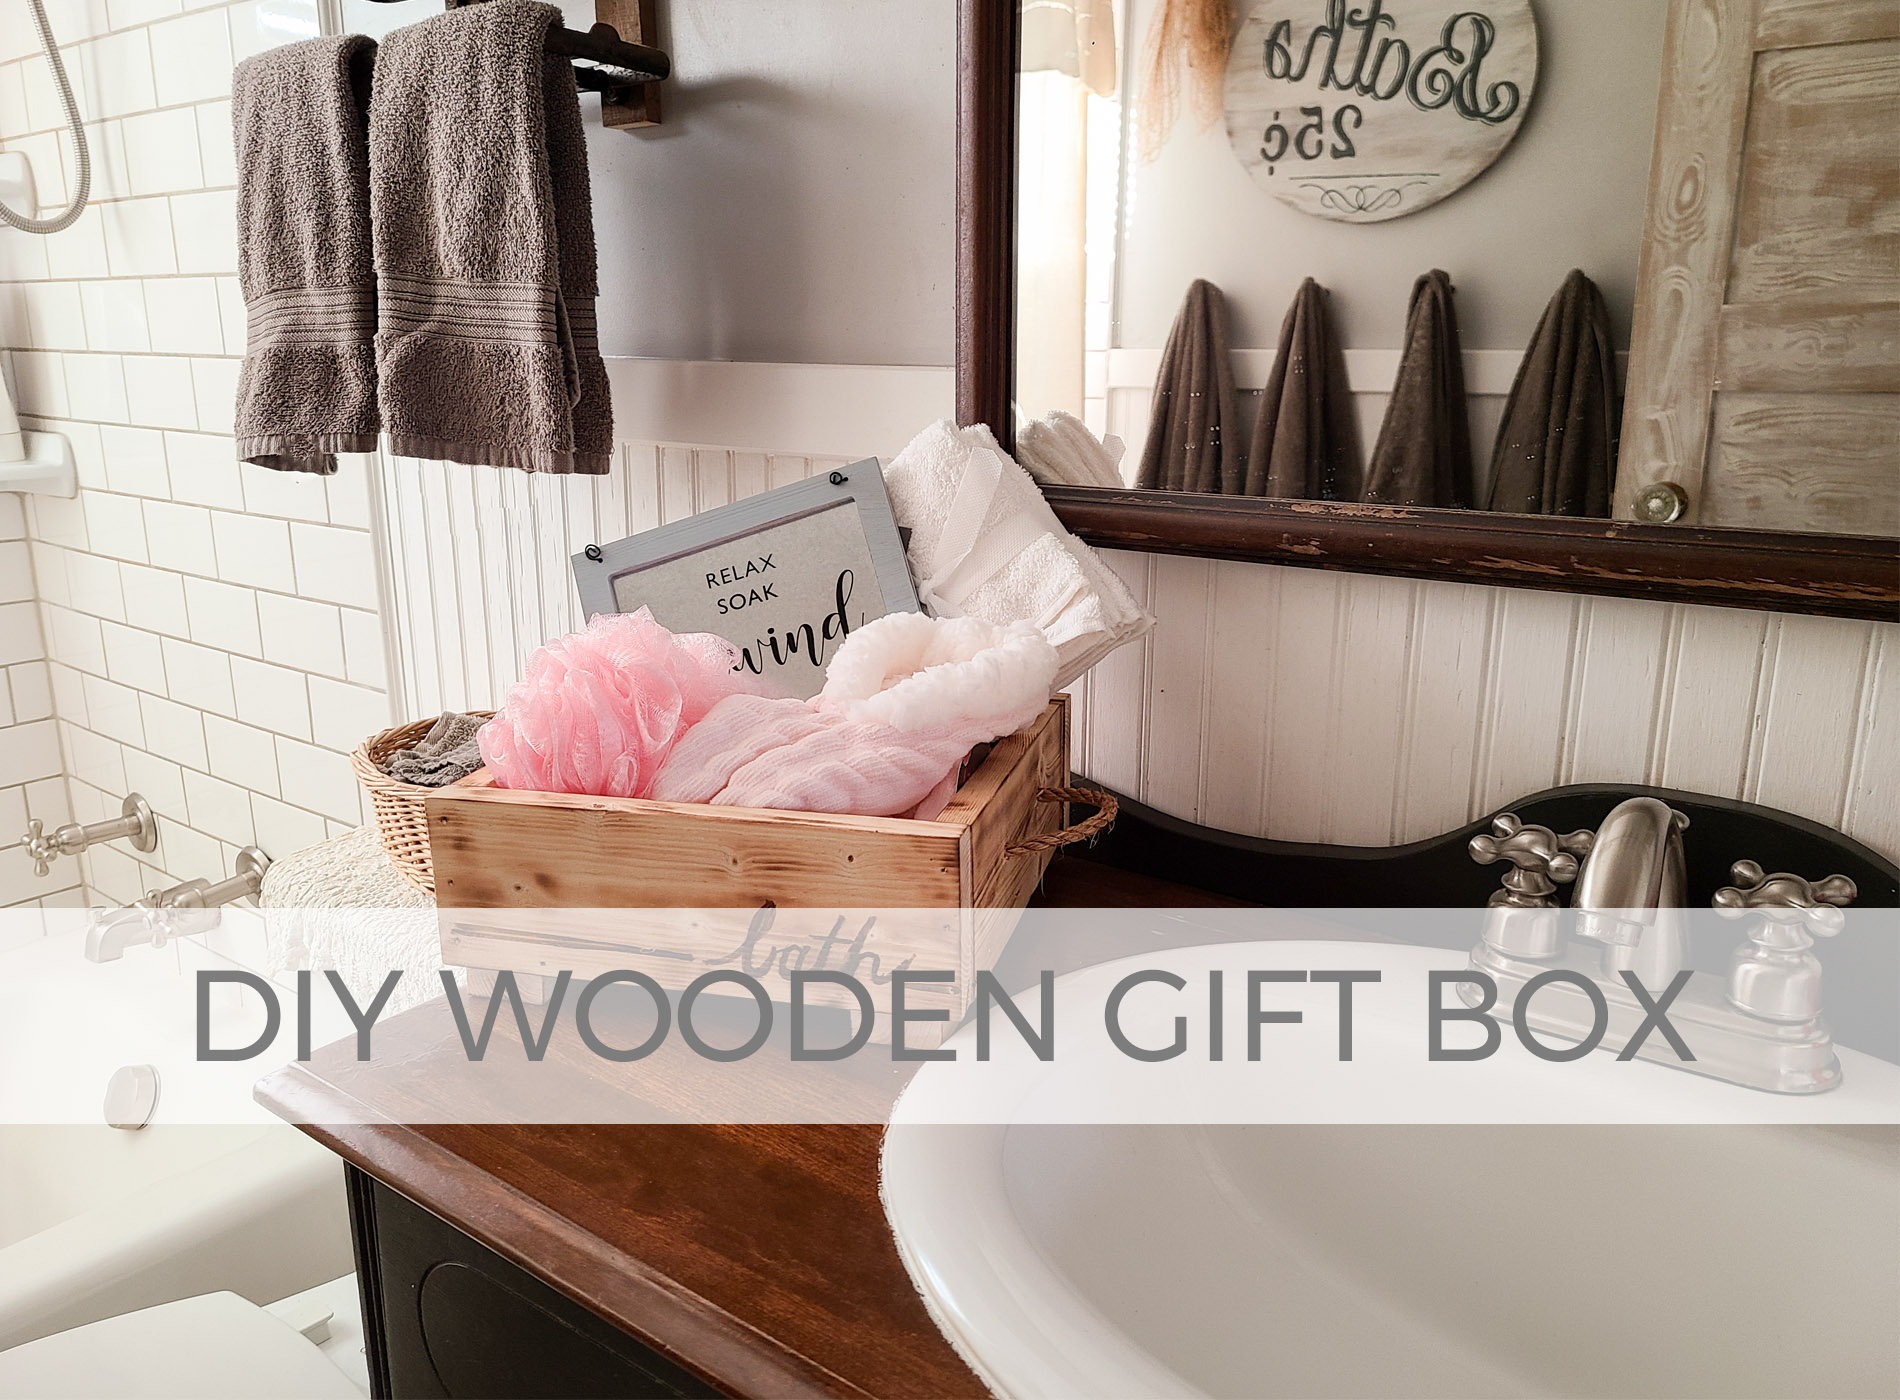 DIY Wooden Gift Box with Tutorial for 3 Different Last-Minute Gifts by Larissa of Prodigal Pieces | prodigalpieces.com #prodigalpieces